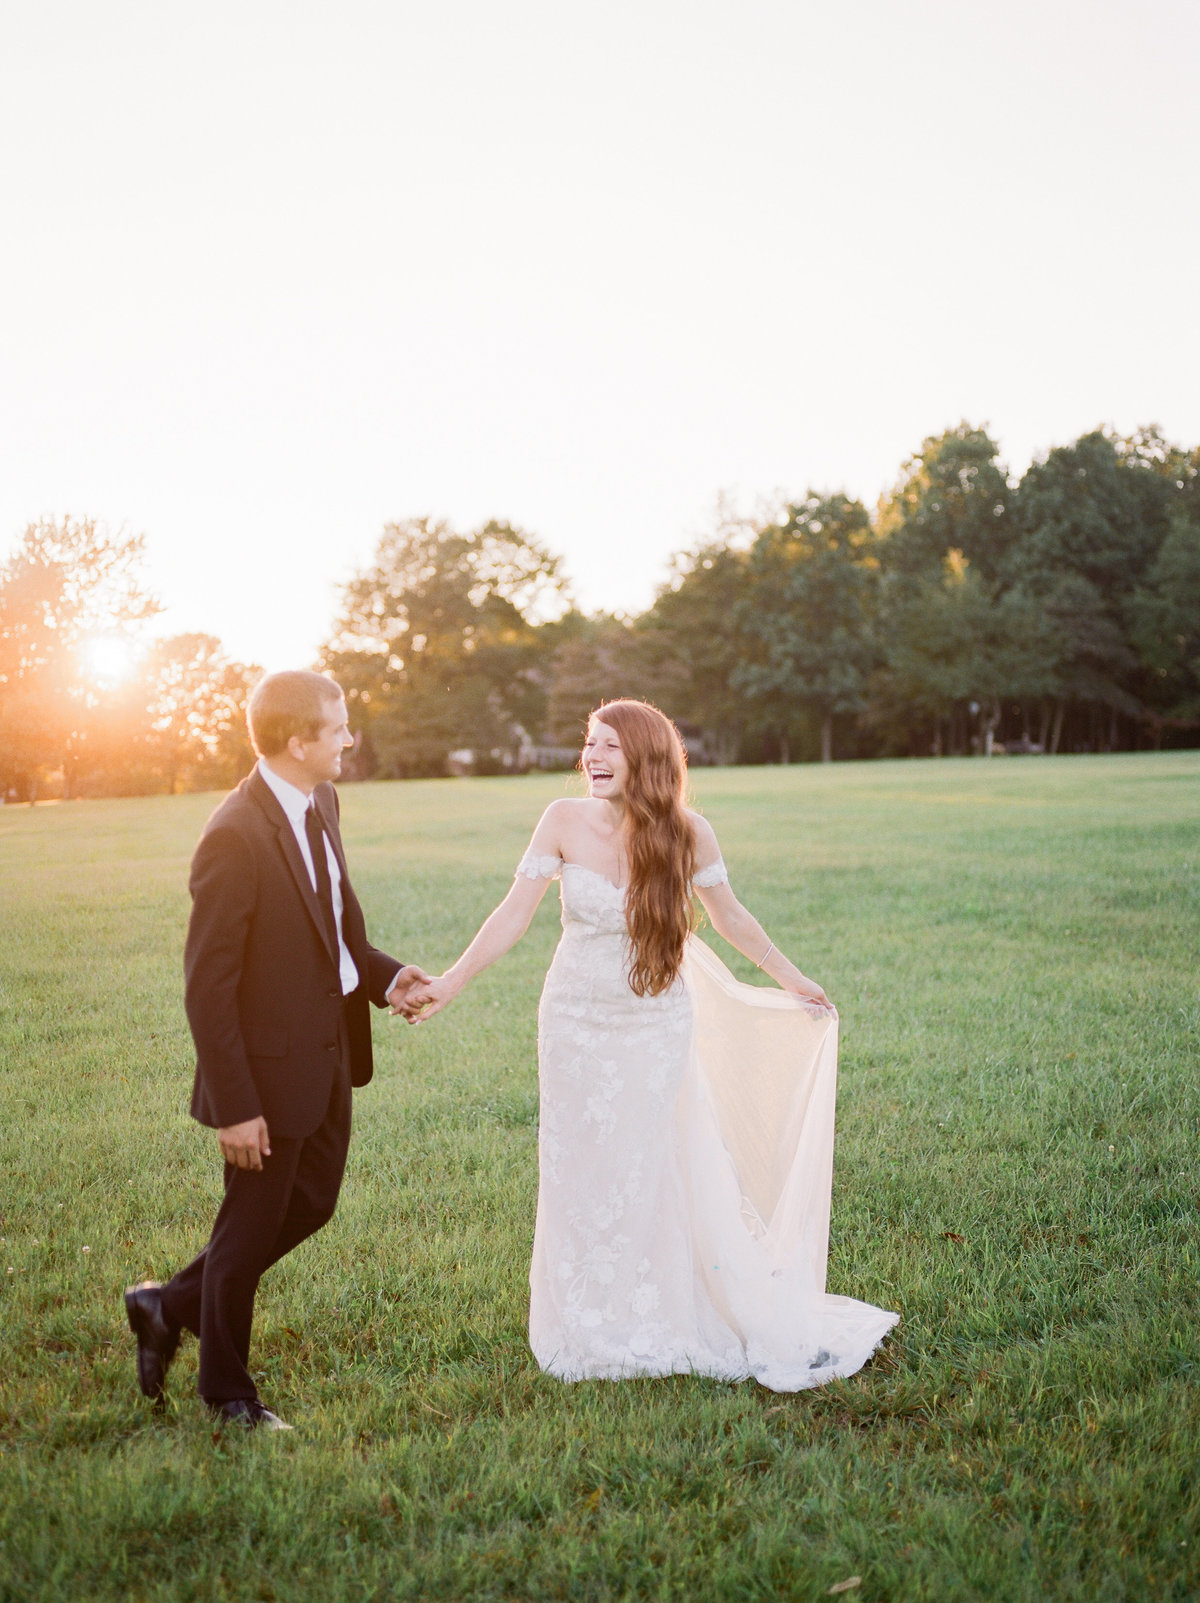 bride and groom walking through grassy field holding hands